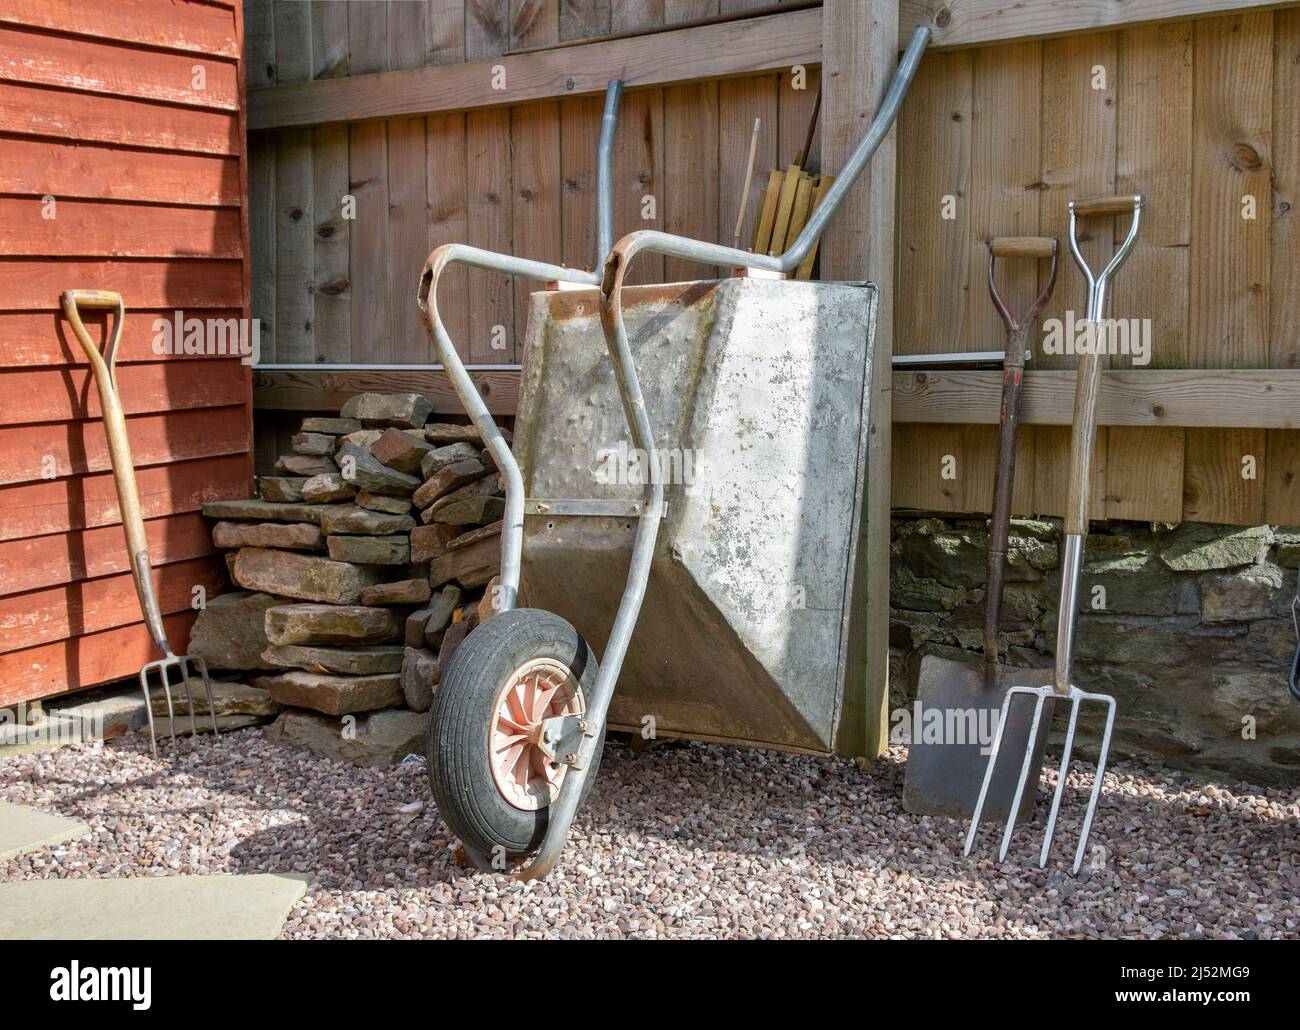 Garden corner with gardening items including wheelbarrow, large spade, large fork, Stone pile, gloves and wellies against wooden fence and stone wall Stock Photo